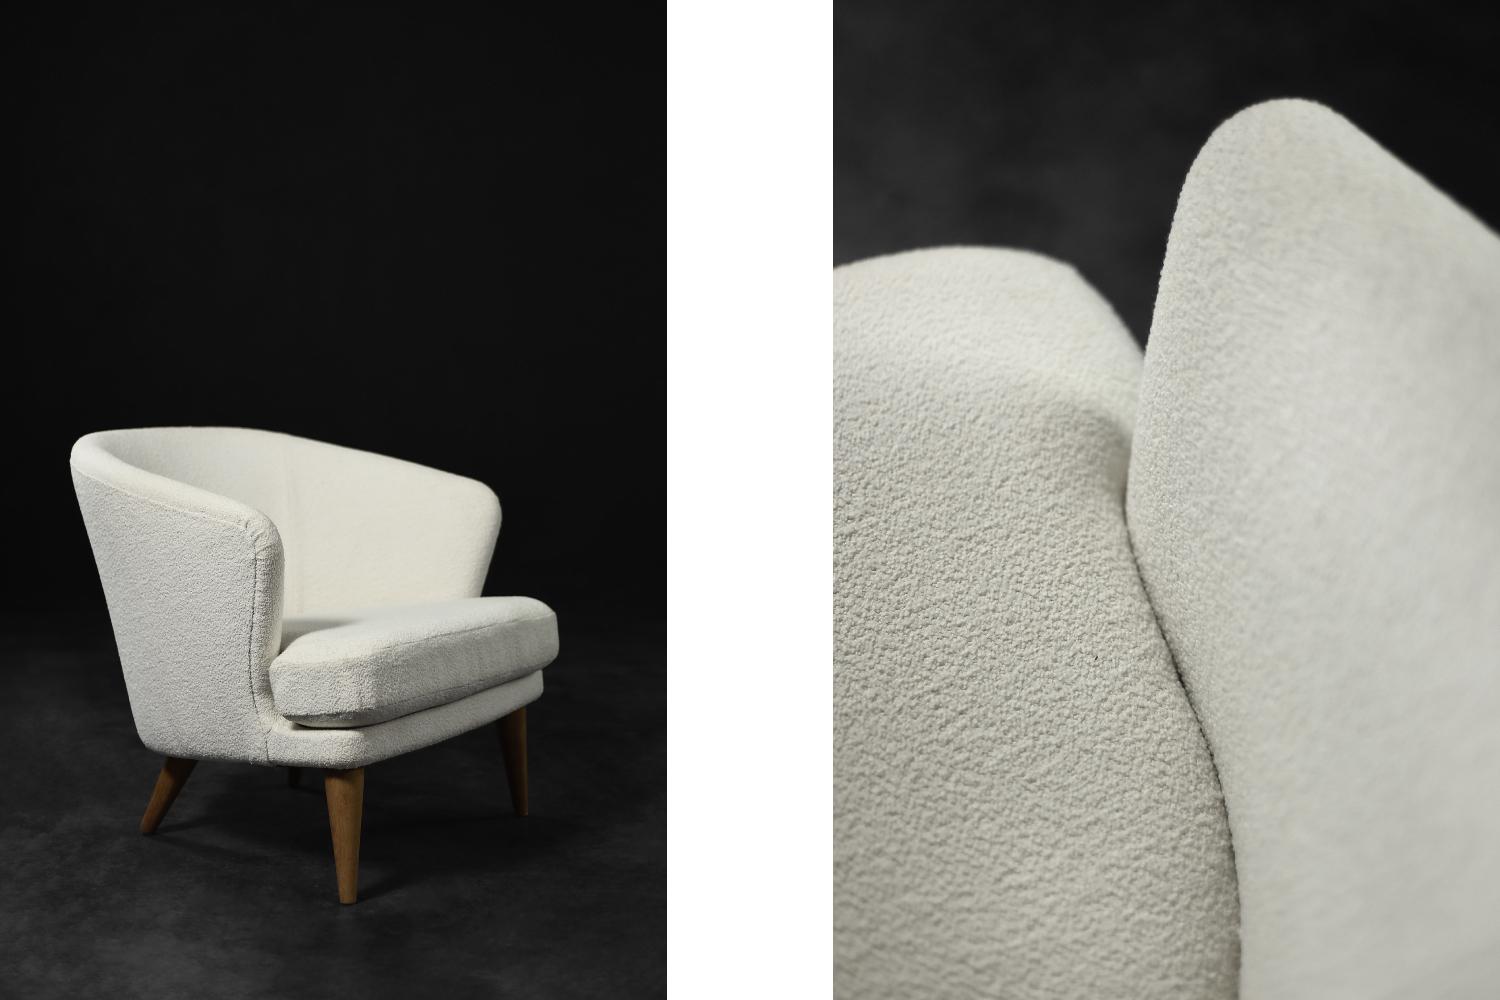 This low modernist armchair was produced in Scandinavia during the 1960s. It is characterized by a rounded backrest that flows smoothly into the armrests. The backrest and seat have been reupholstered with high-quality, thick, white fabric. The wide